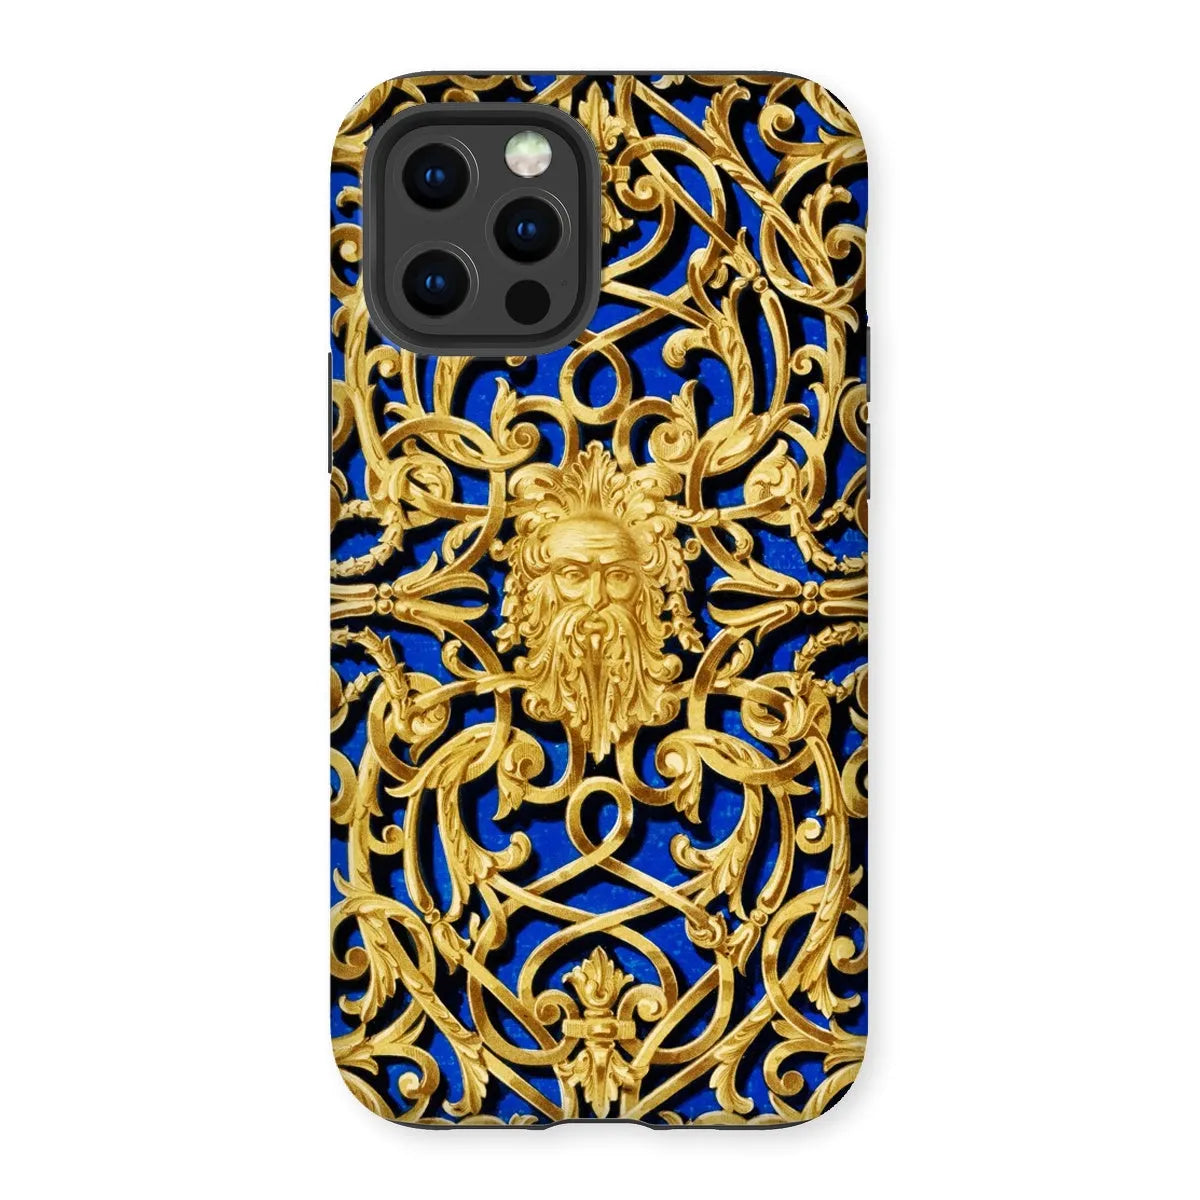 Gilded Gate Victorian Phone Case - Sir Matthew Digby Wyatt - Iphone 12 Pro / Matte - Mobile Phone Cases - Aesthetic Art